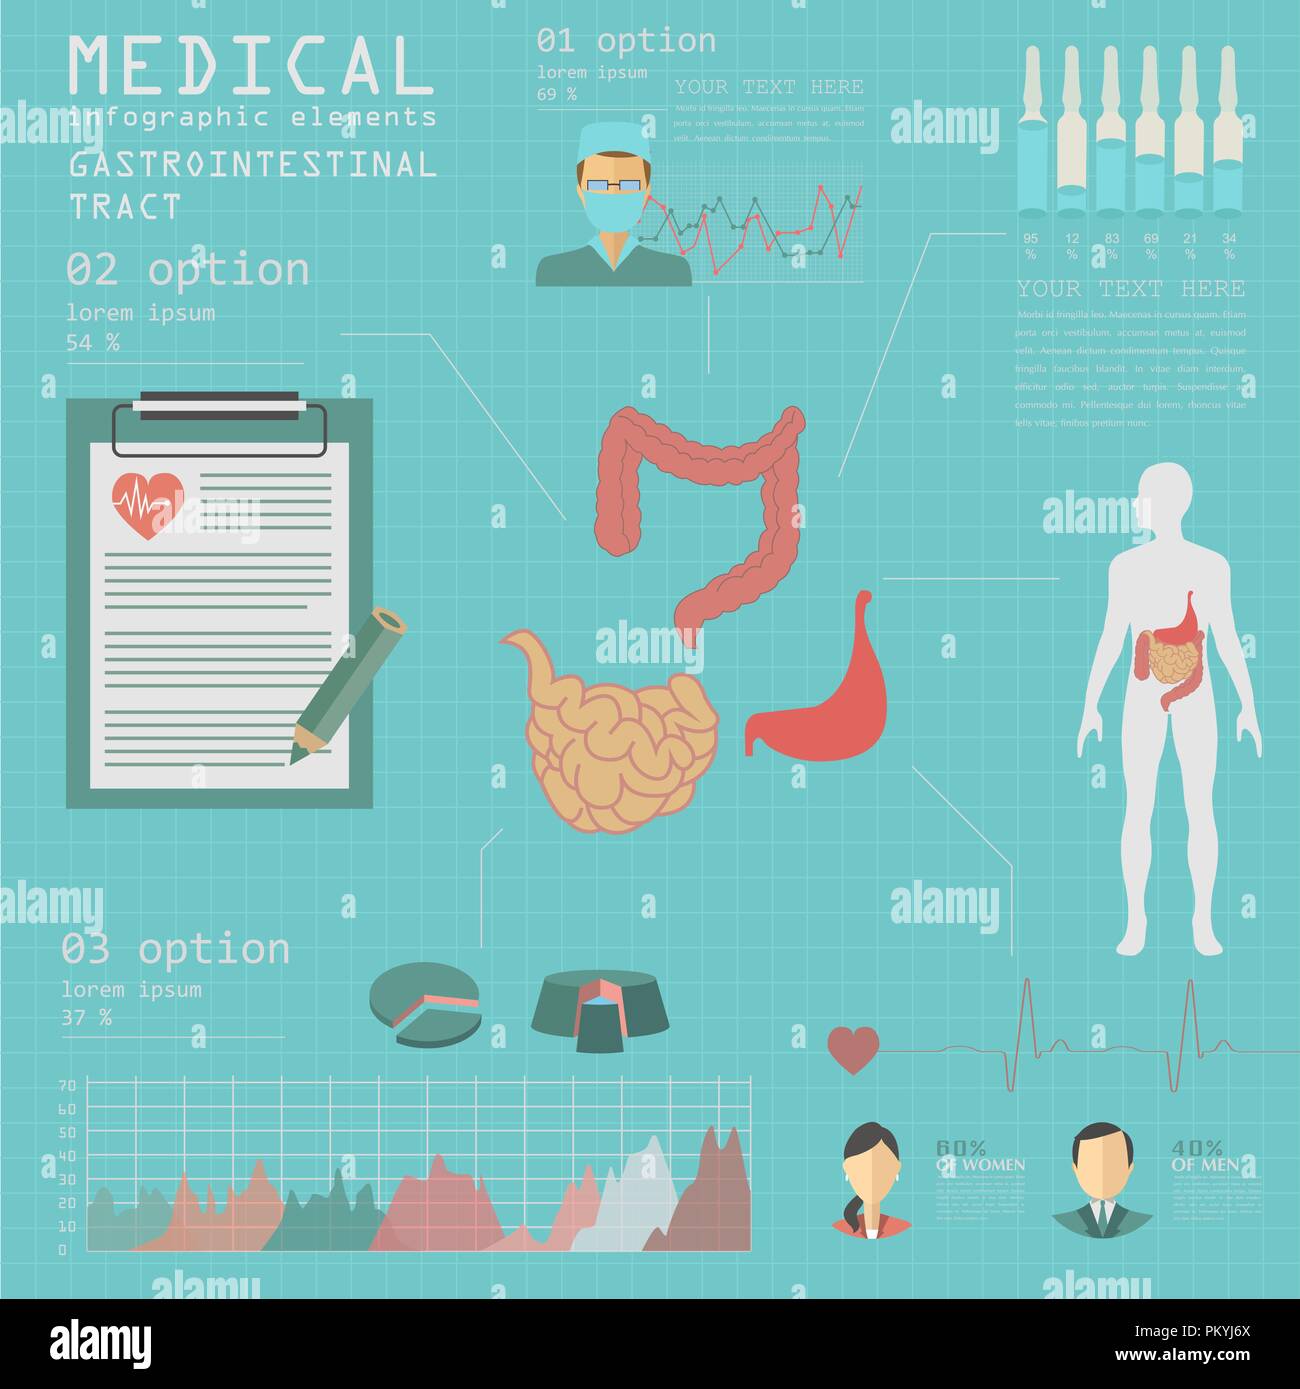 Medical and healthcare infographic, gastrointestinal tract infographics. Vector illustration Stock Vector